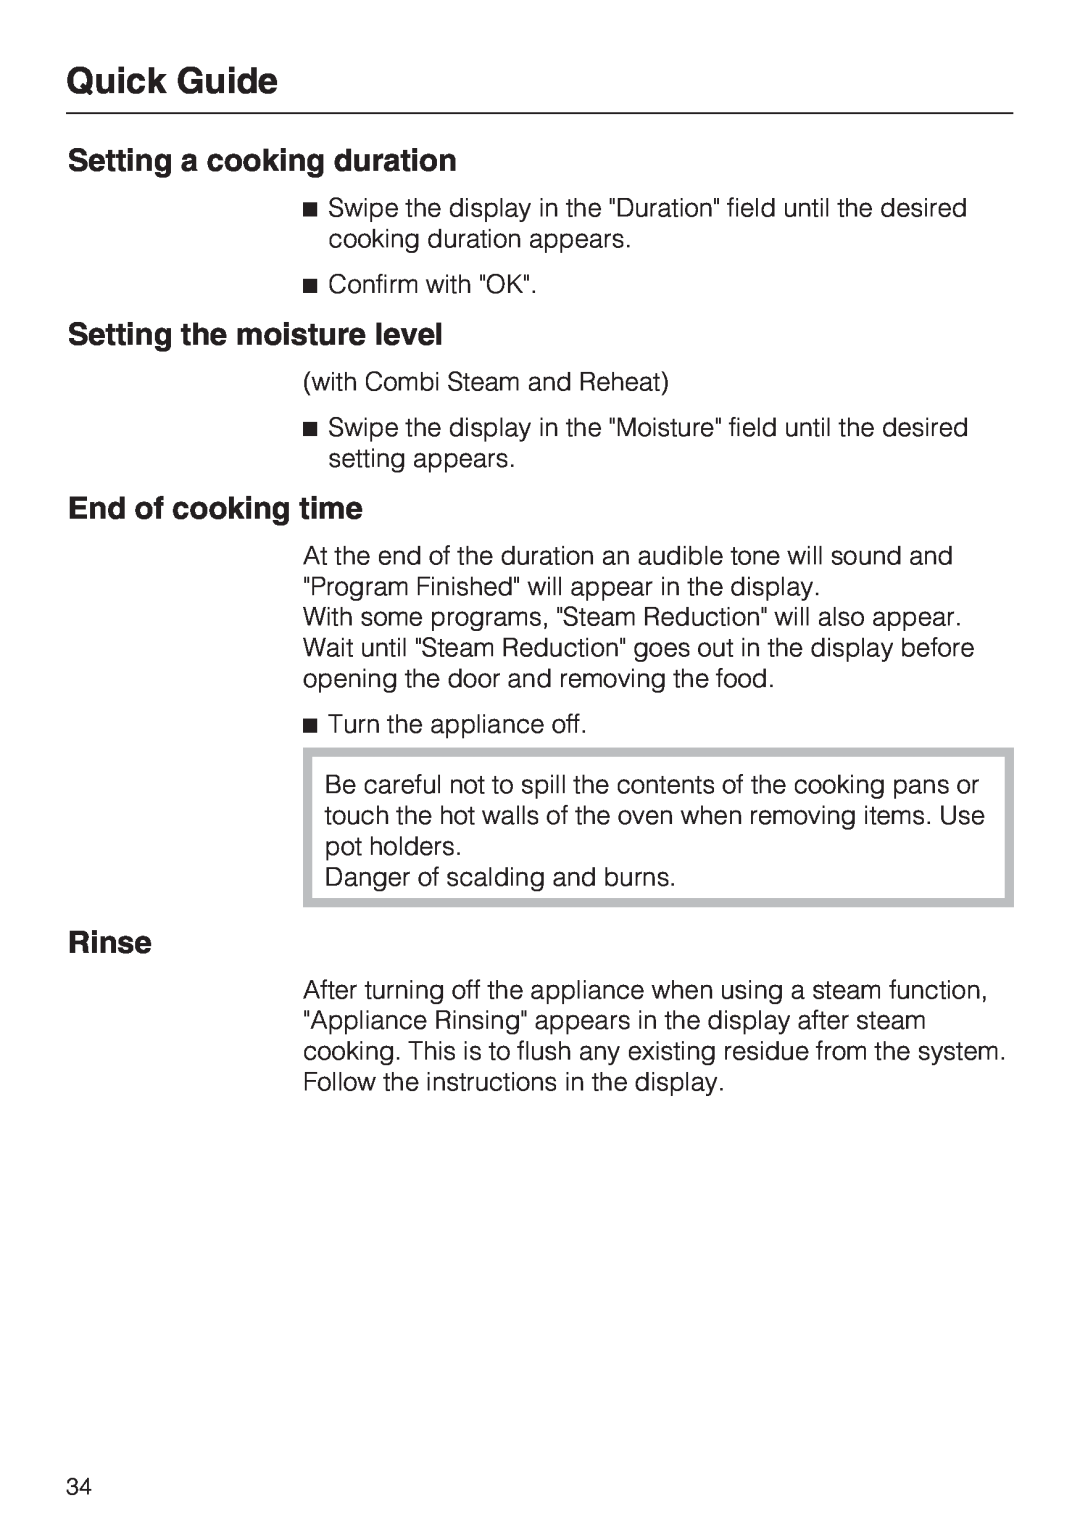 Miele 09 855 050 Setting a cooking duration, Setting the moisture level, End of cooking time, Rinse, Quick Guide 